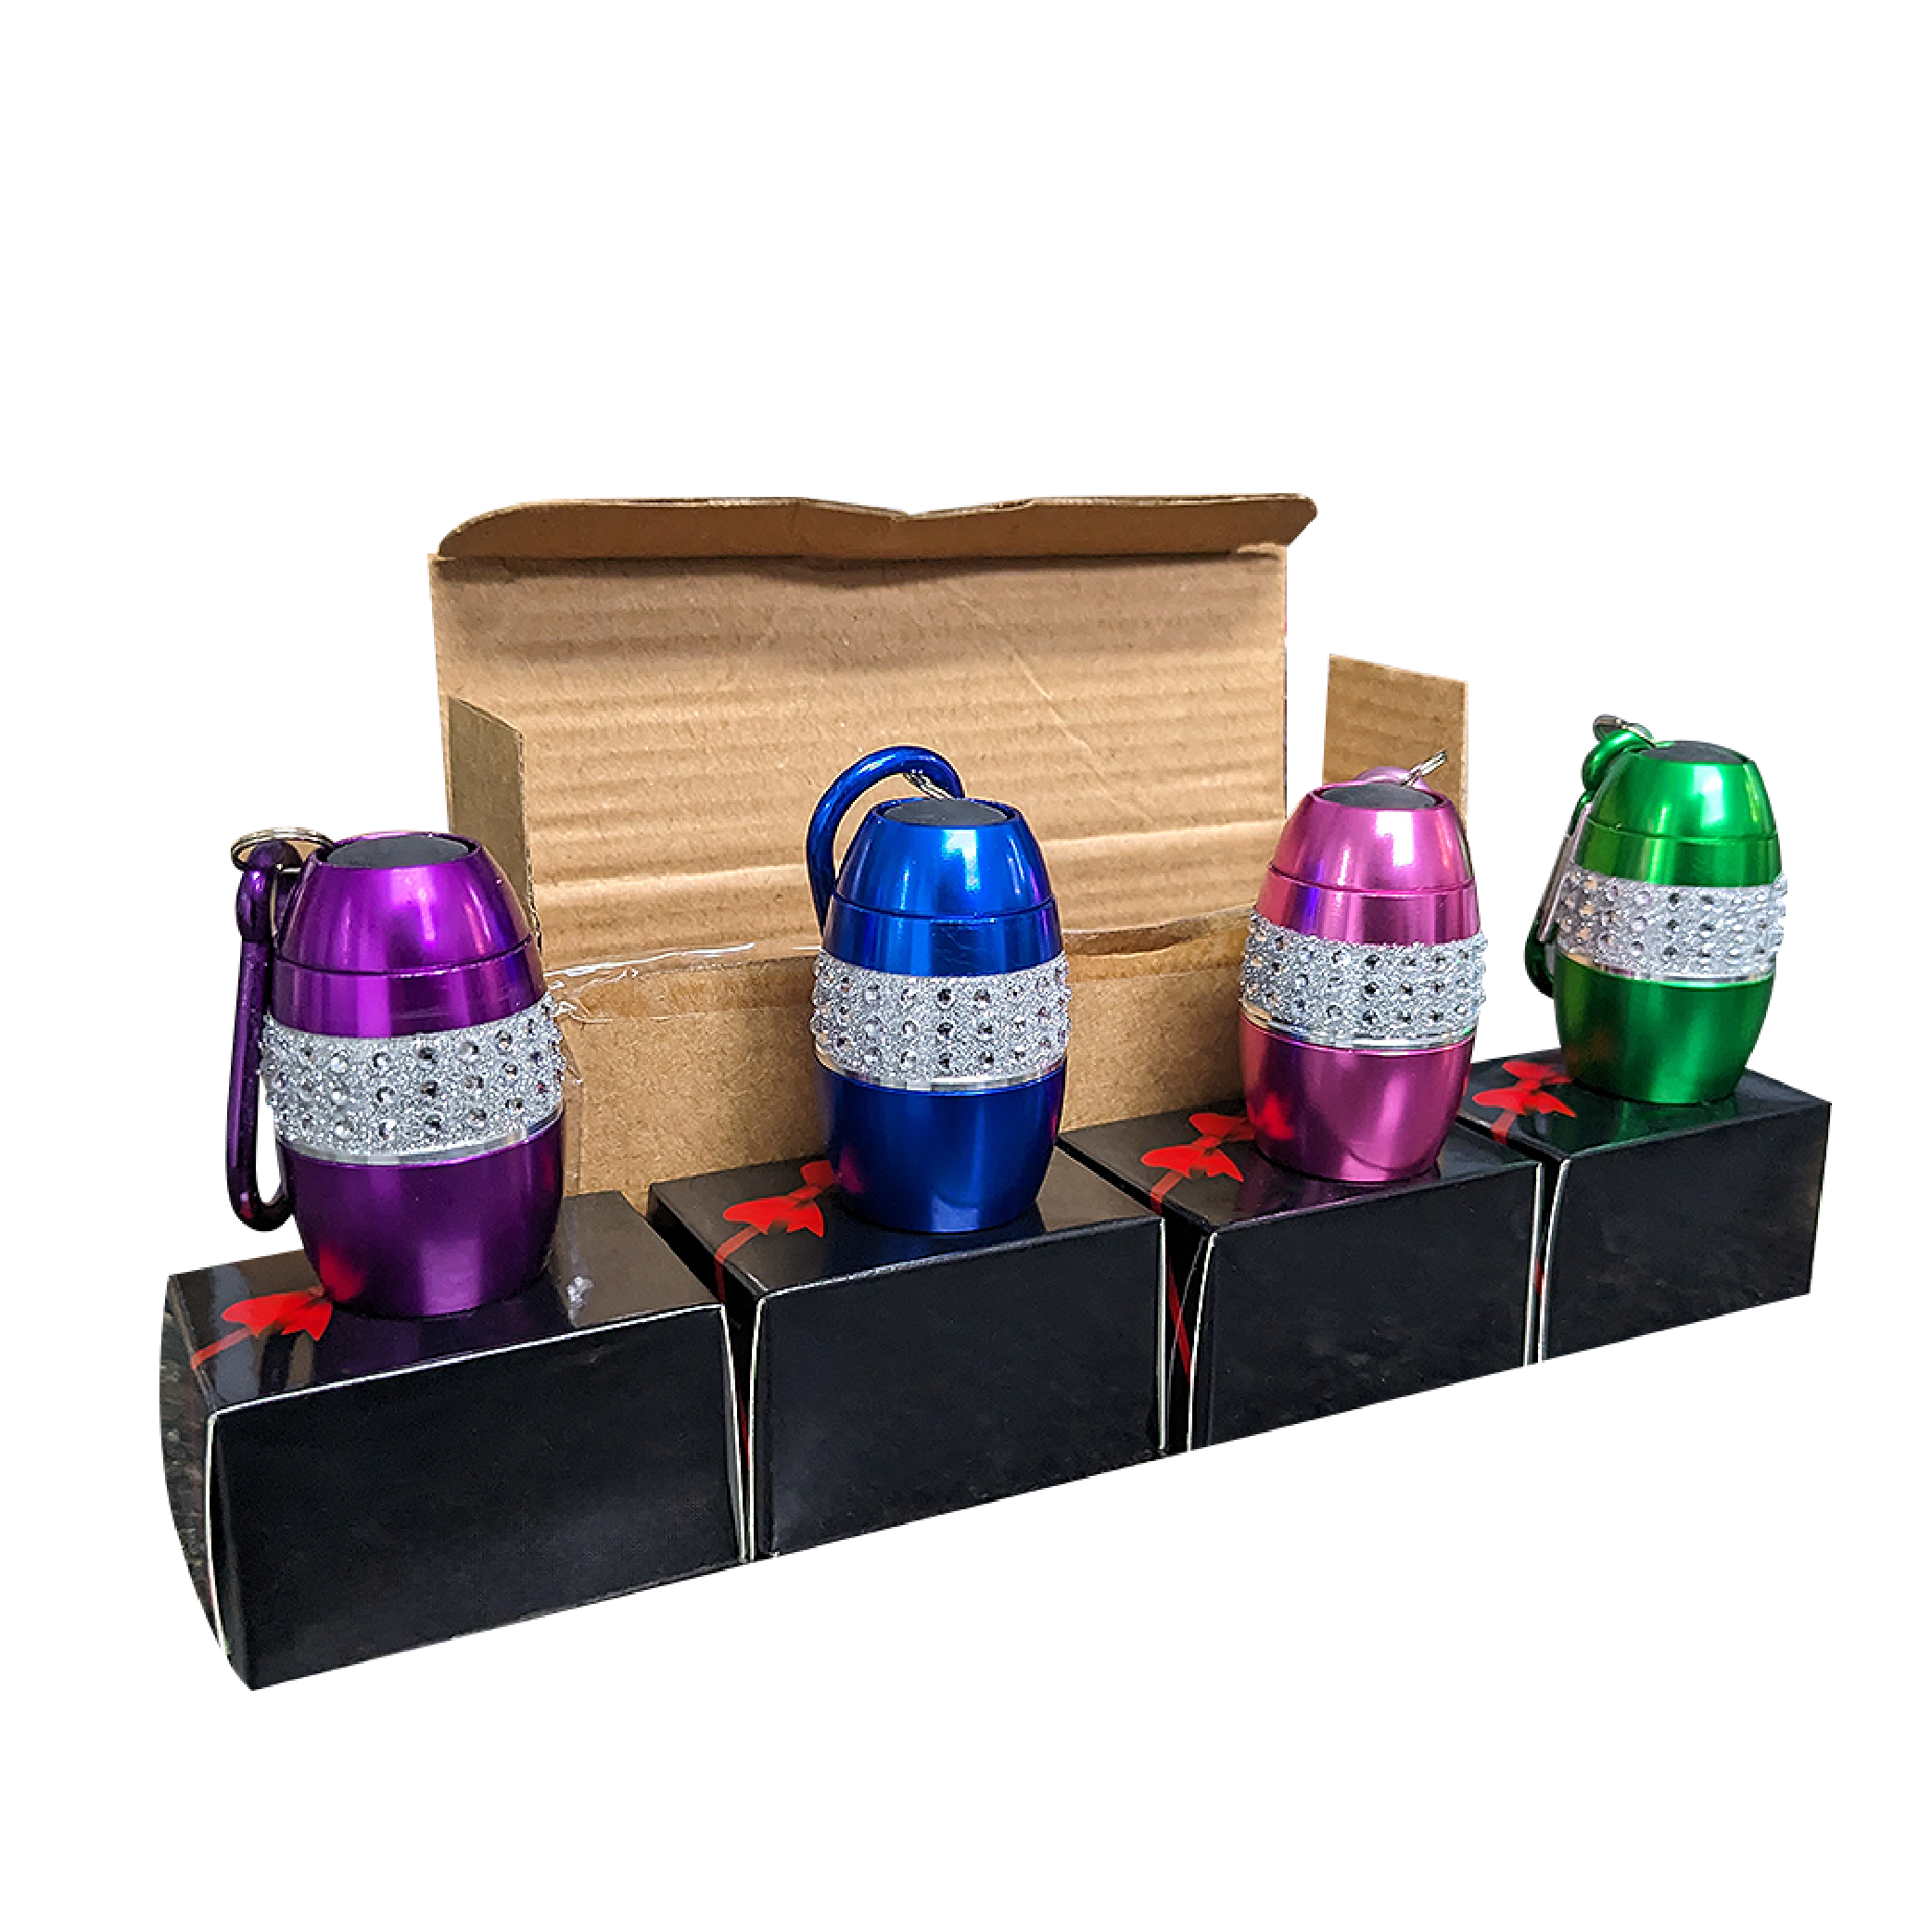 Bling Flashlight with COB LED Light - 4 Pack in Gift Box Packaging W/ Installed Batteries